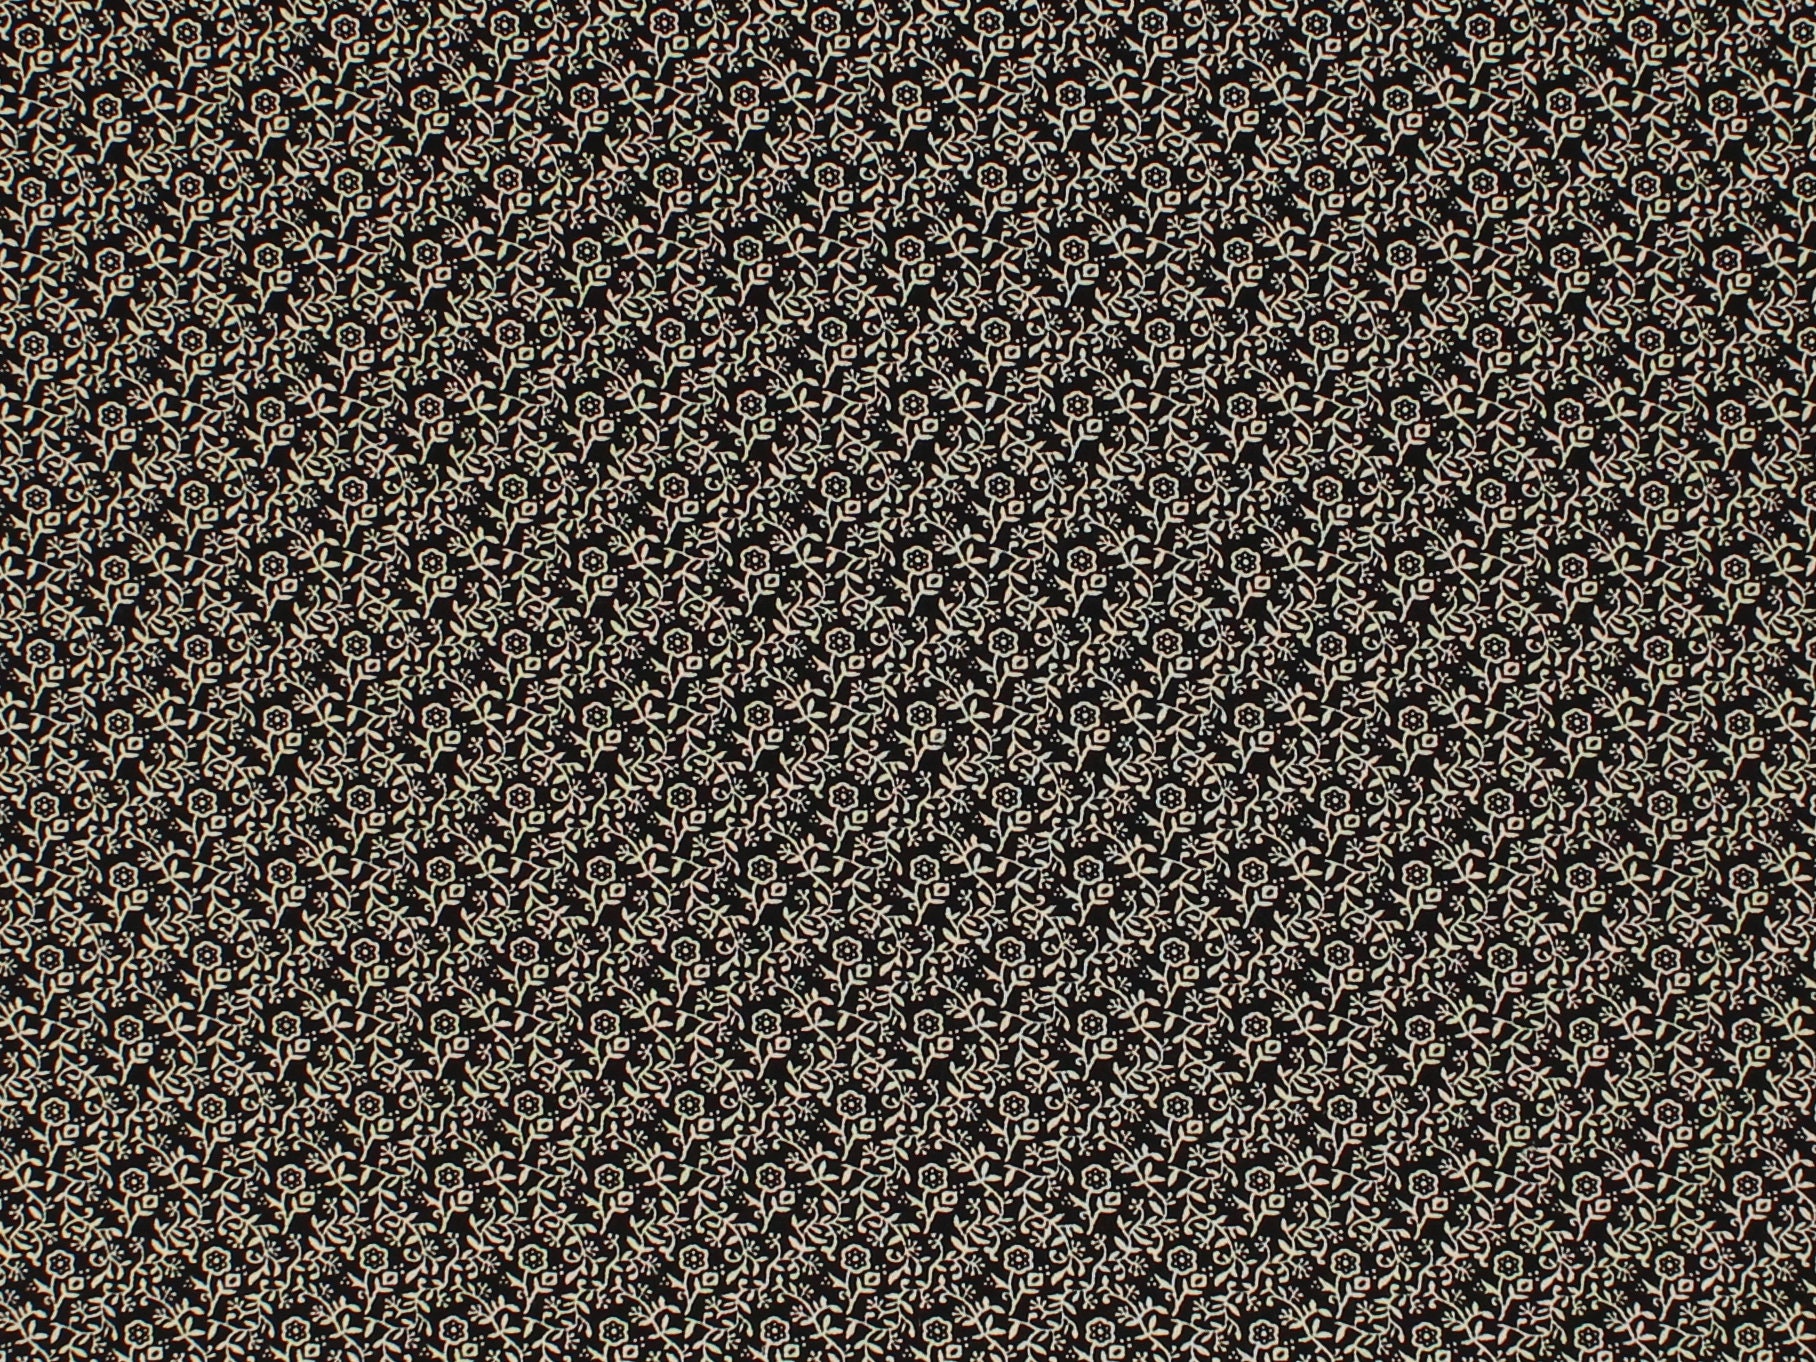 Remember When Civil War Reproduction Cream Cotton Quilting Fabric With  Small Black Flower Design - Kittredge Mercantile